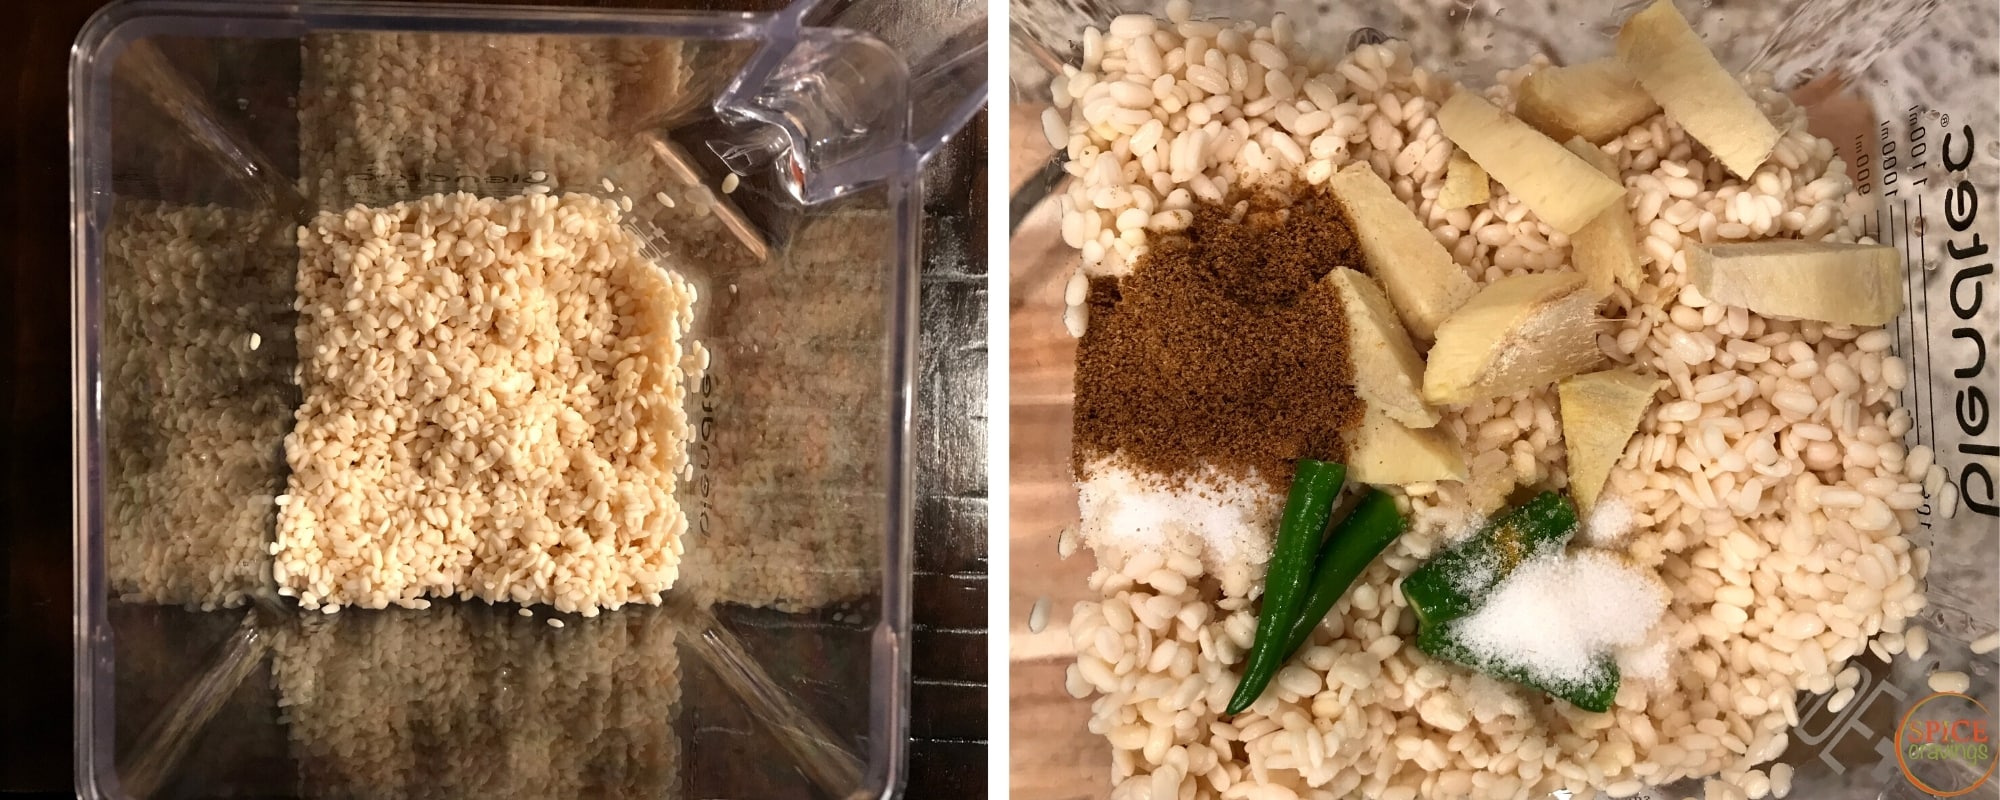 Left shot shows lentils in blender, right shot shows topped with gingrer, chili, spices